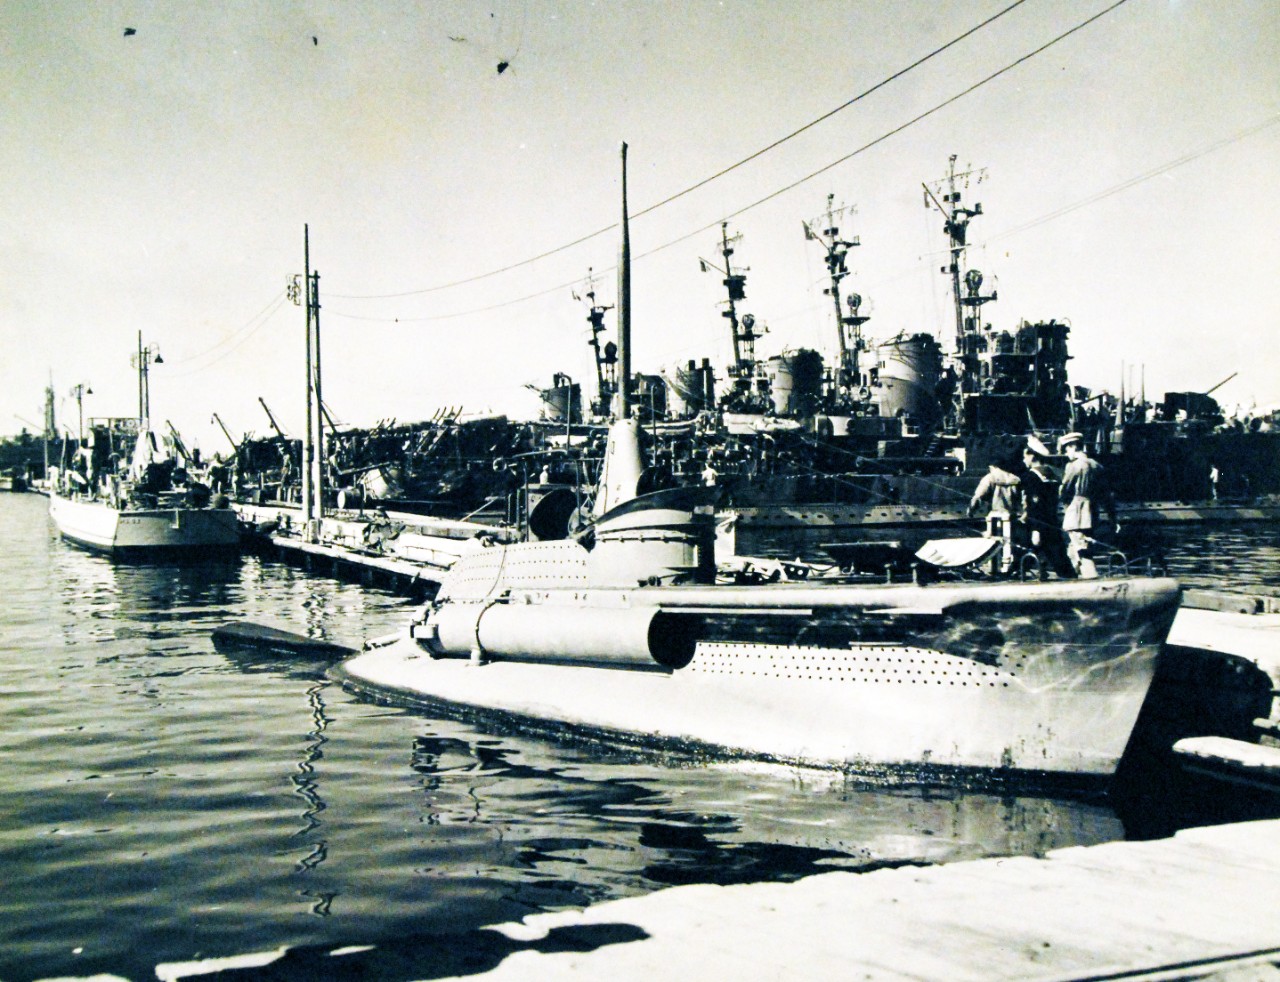 80-G-43771:  Italian CB Midget Submarine.    Italian warships surrendered at Taranto, Italy.  Close up of the midget submarine.  Photograph released November 17, 1943.   Official U.S. Navy Photograph, now in the collections of the National Archives.   (2015/10/13).